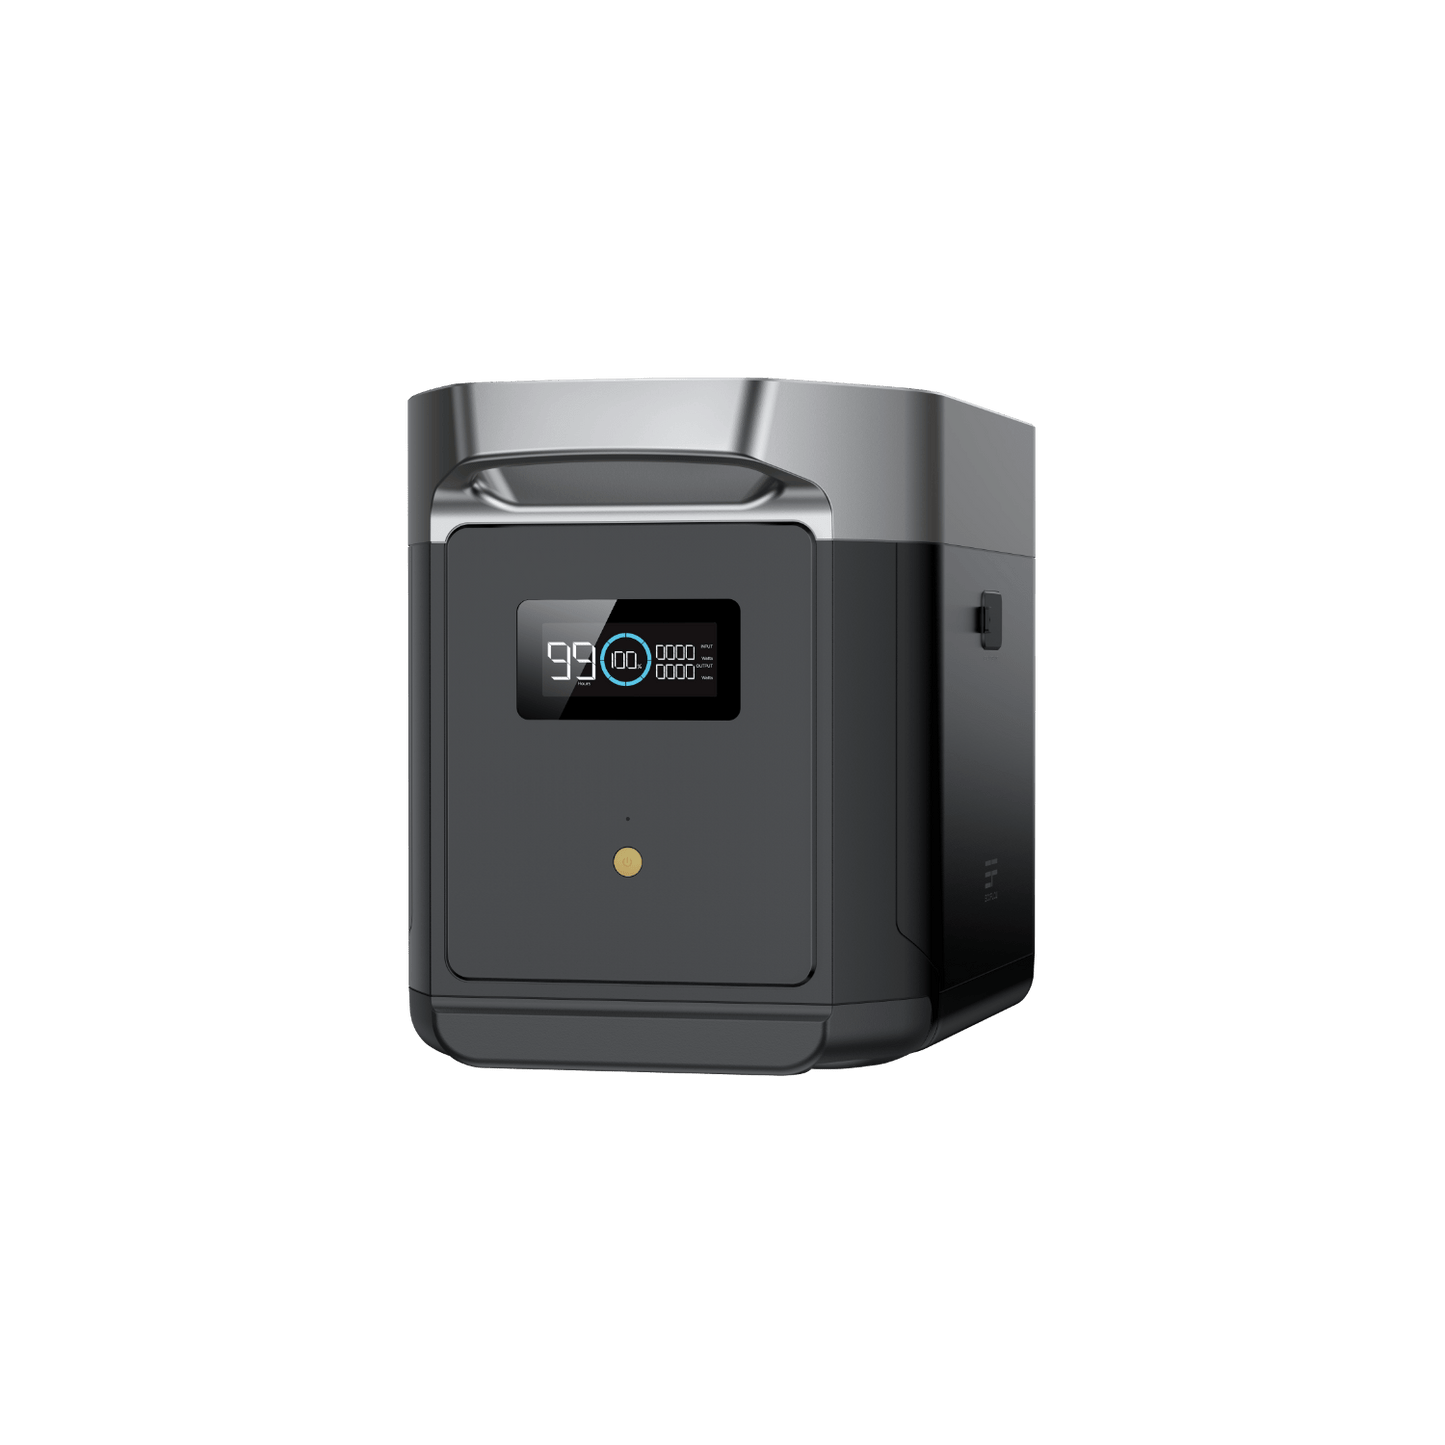 EcoFlow DELTA 2 Max Smart Extra Battery (Recommended Accessory)